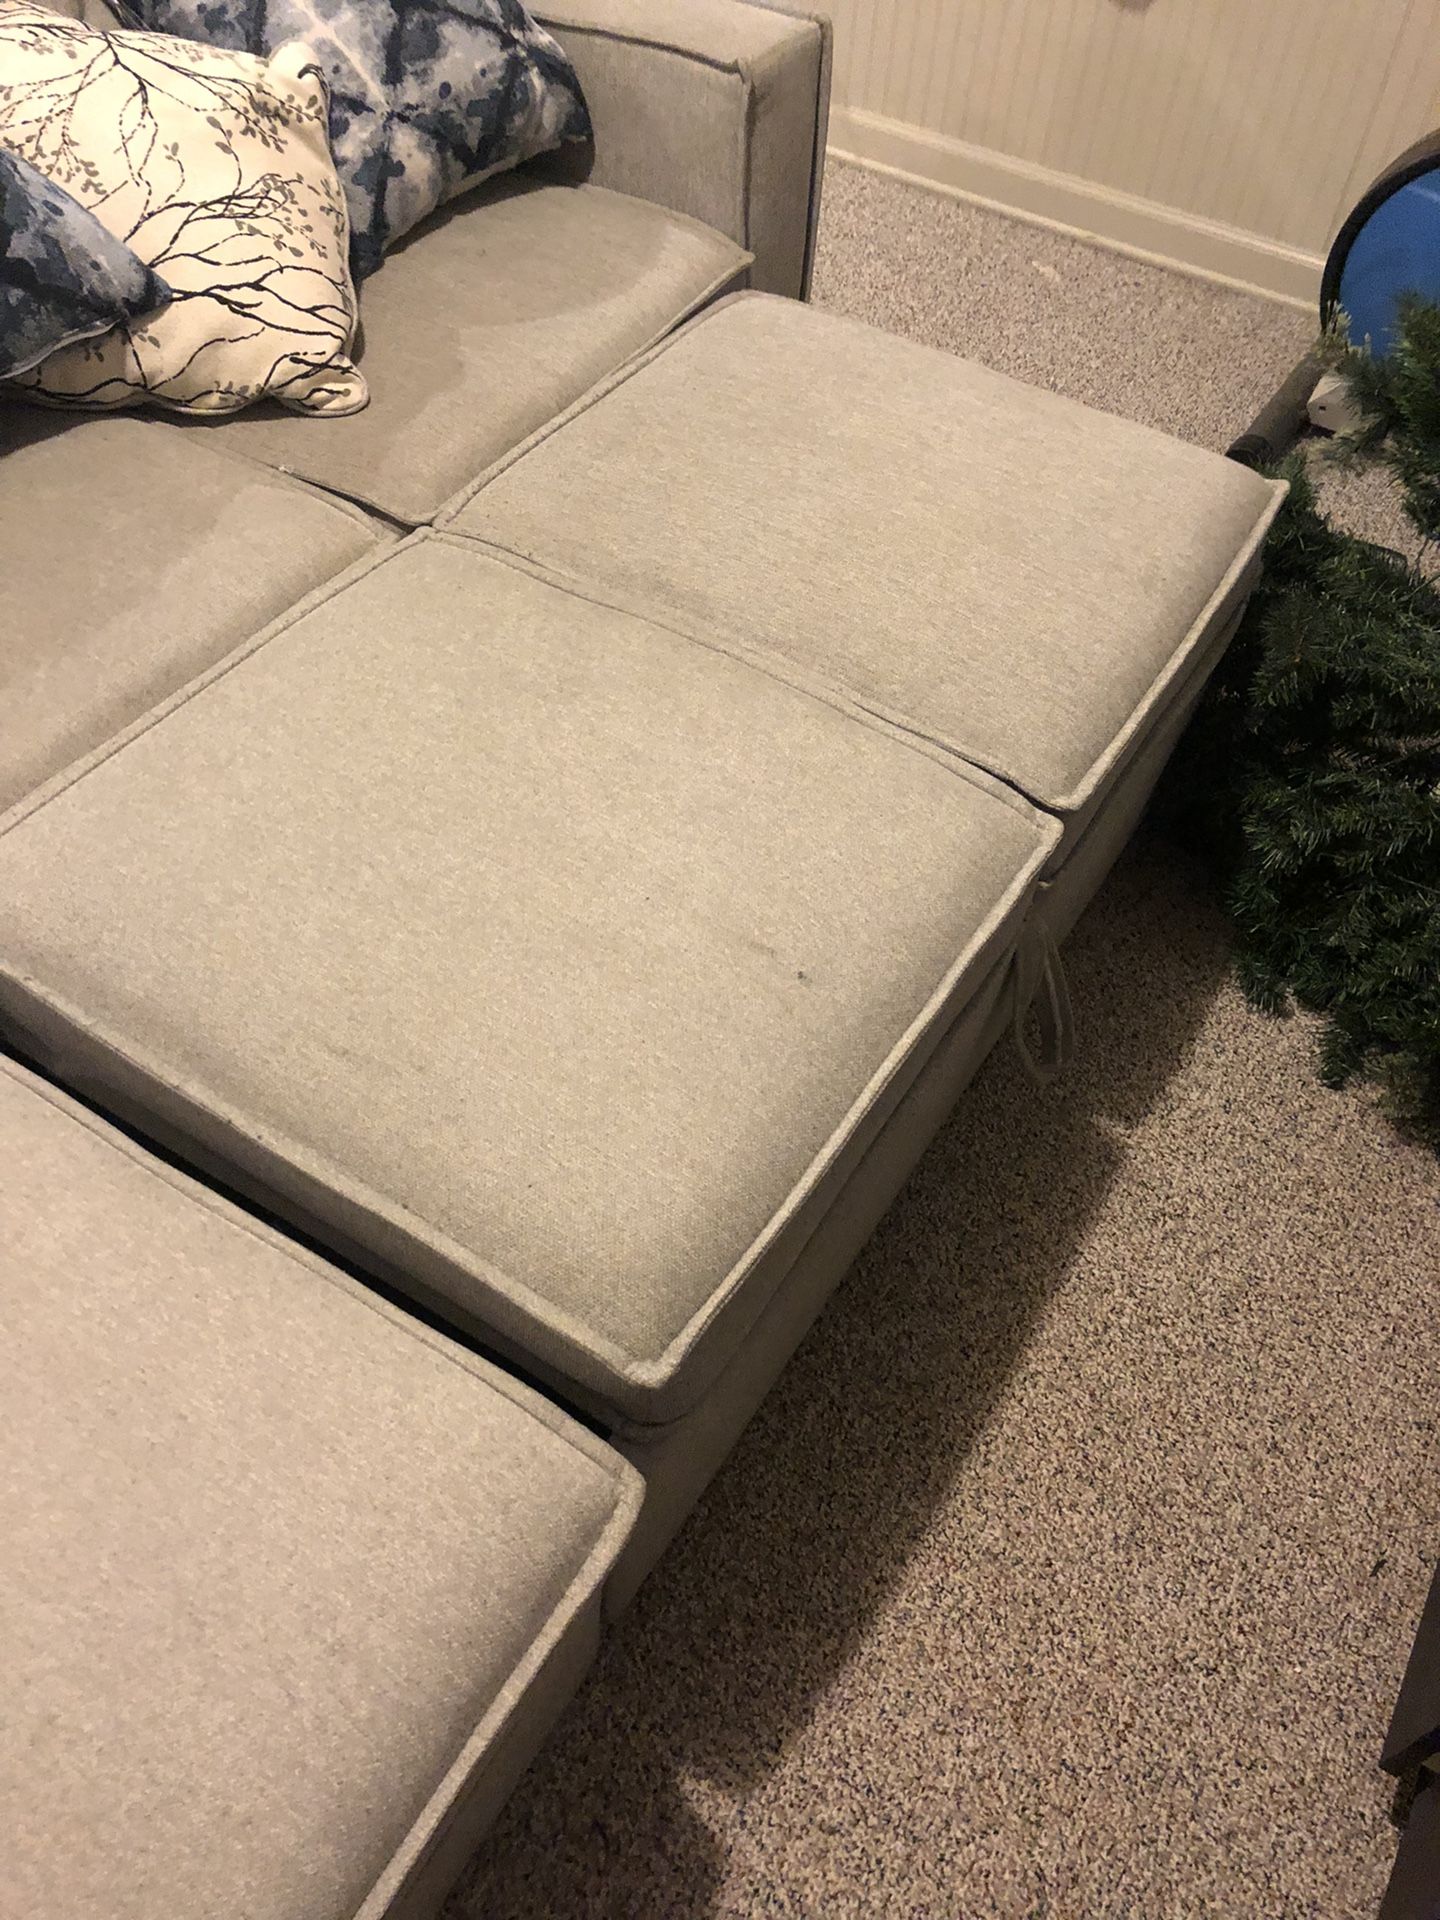 Slightly Used Couch